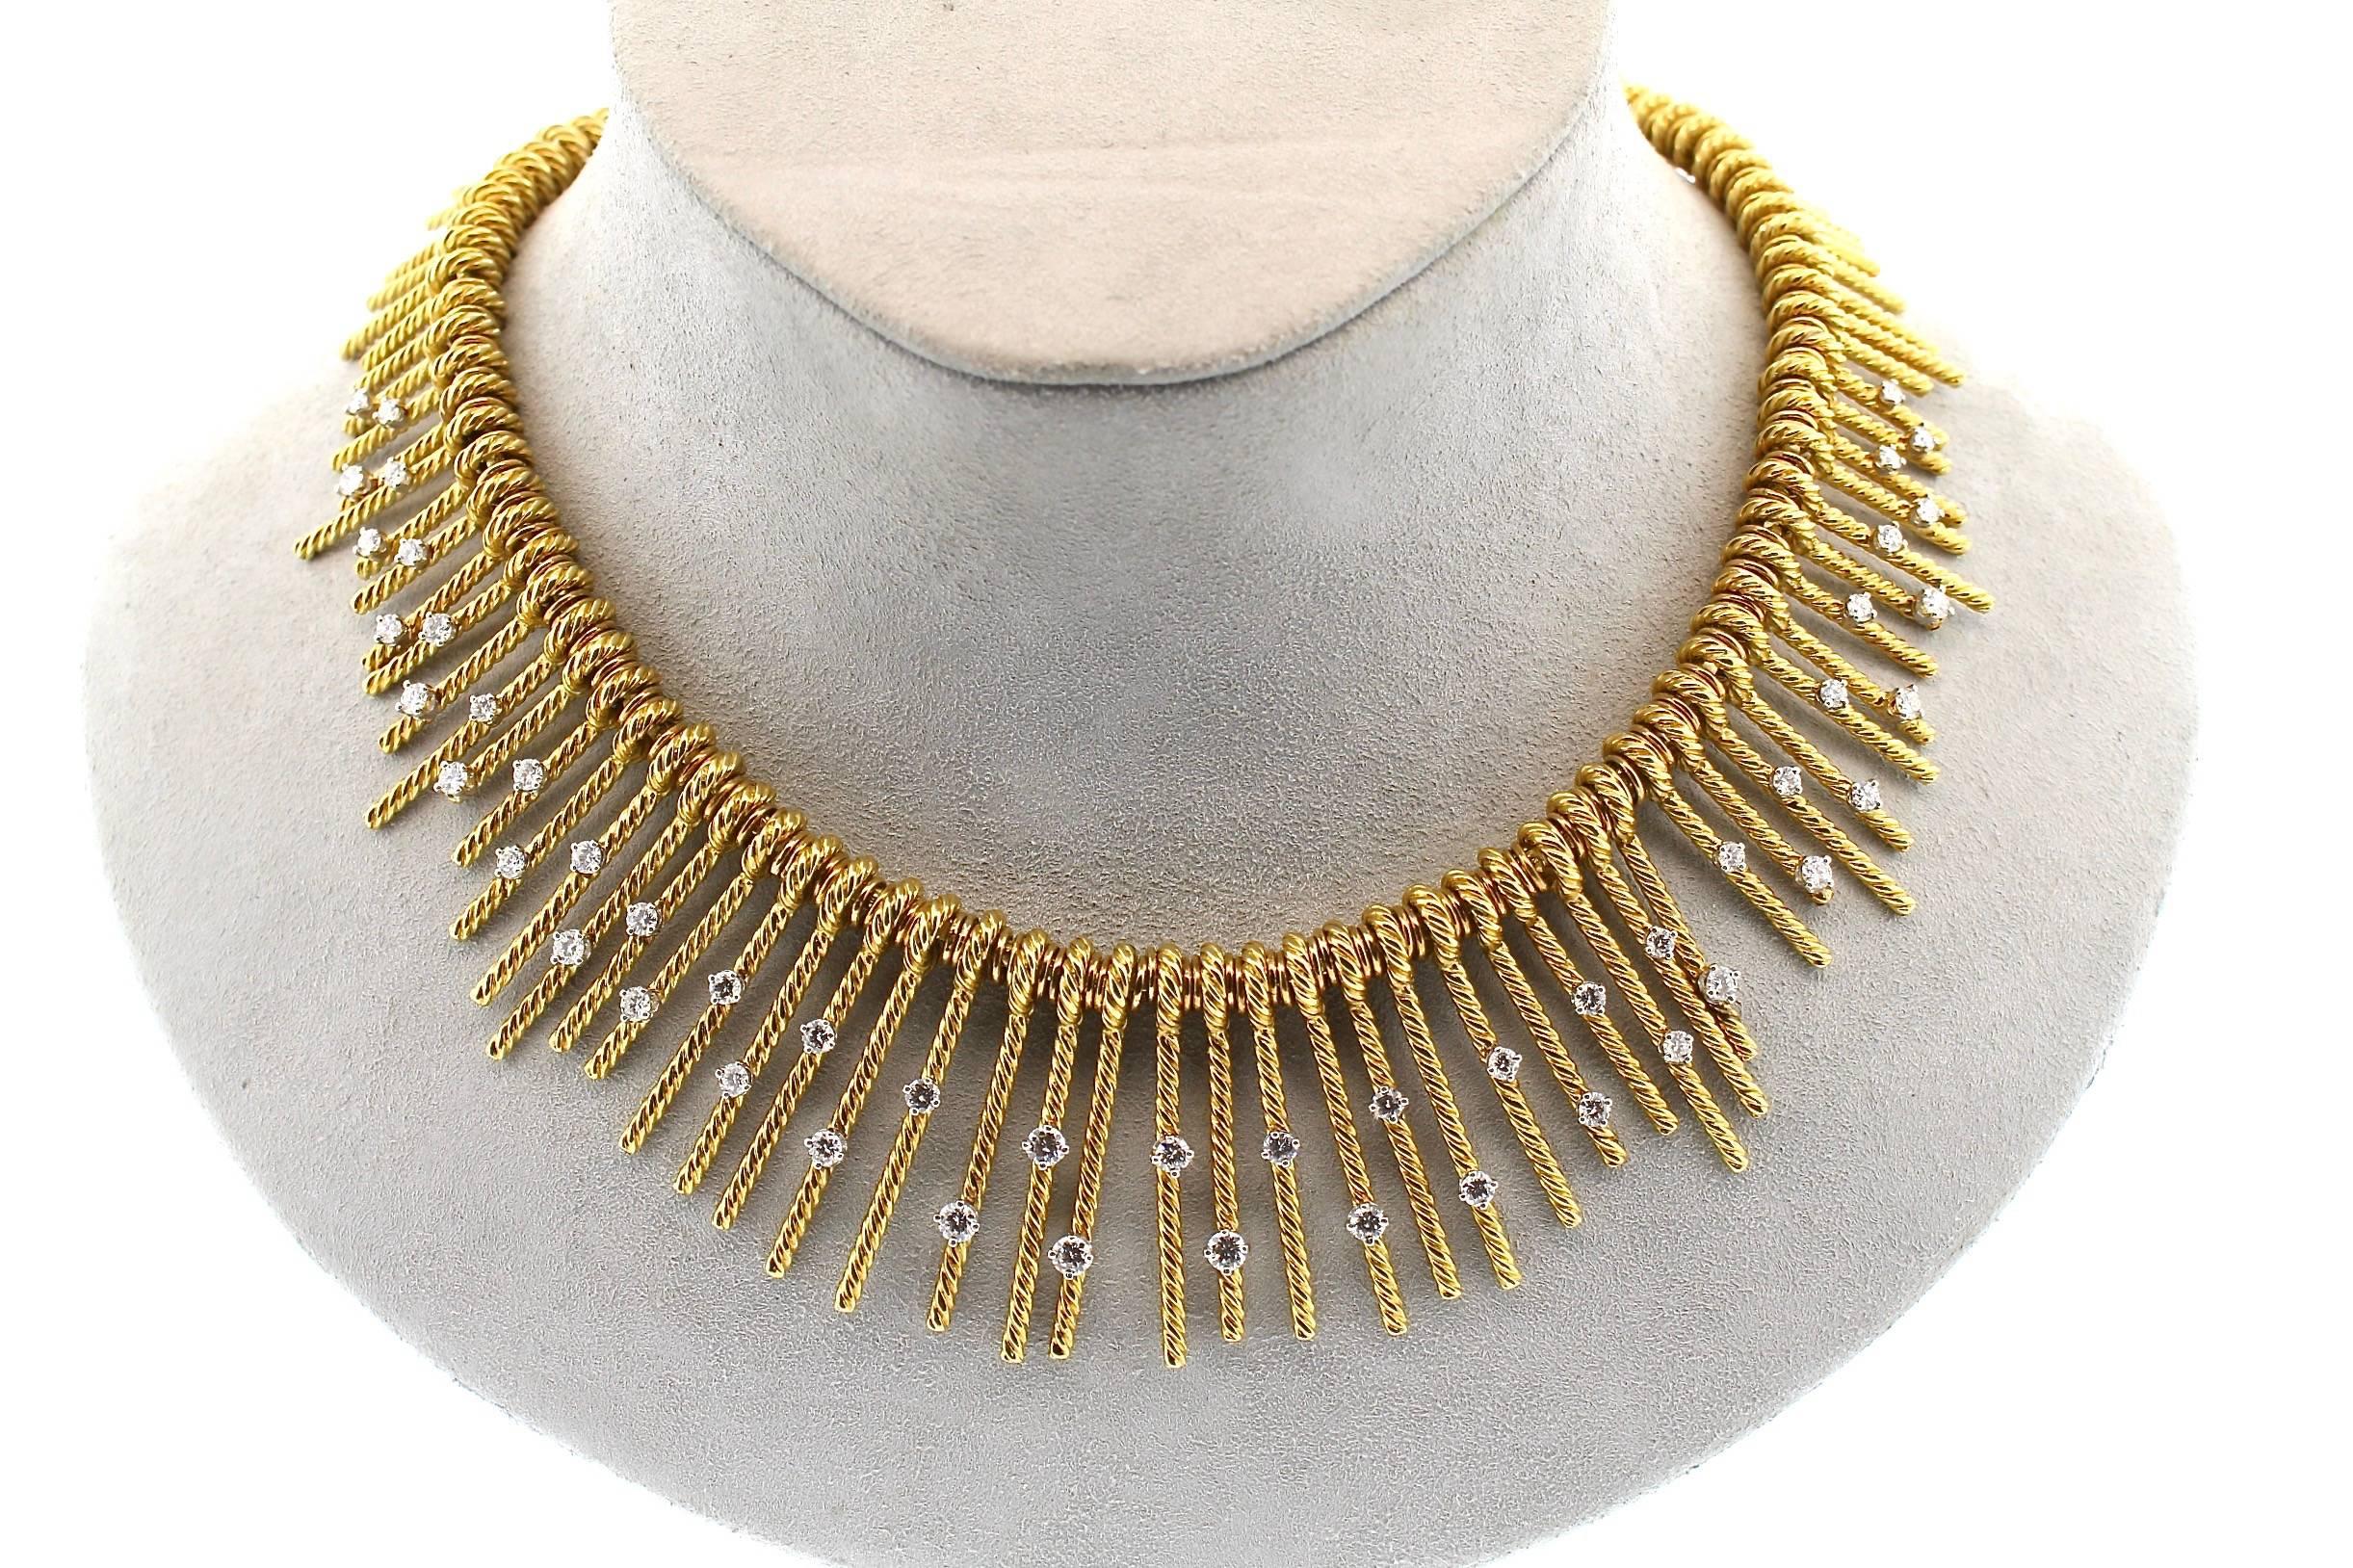 Mid-century modern magnificence!  This ultra chic gold and diamond necklace by Tiffany & Co. was designed by the masterful Jean Schlumberger.  It features the twisted gold work that he was known for, creating texture and angles that are modern